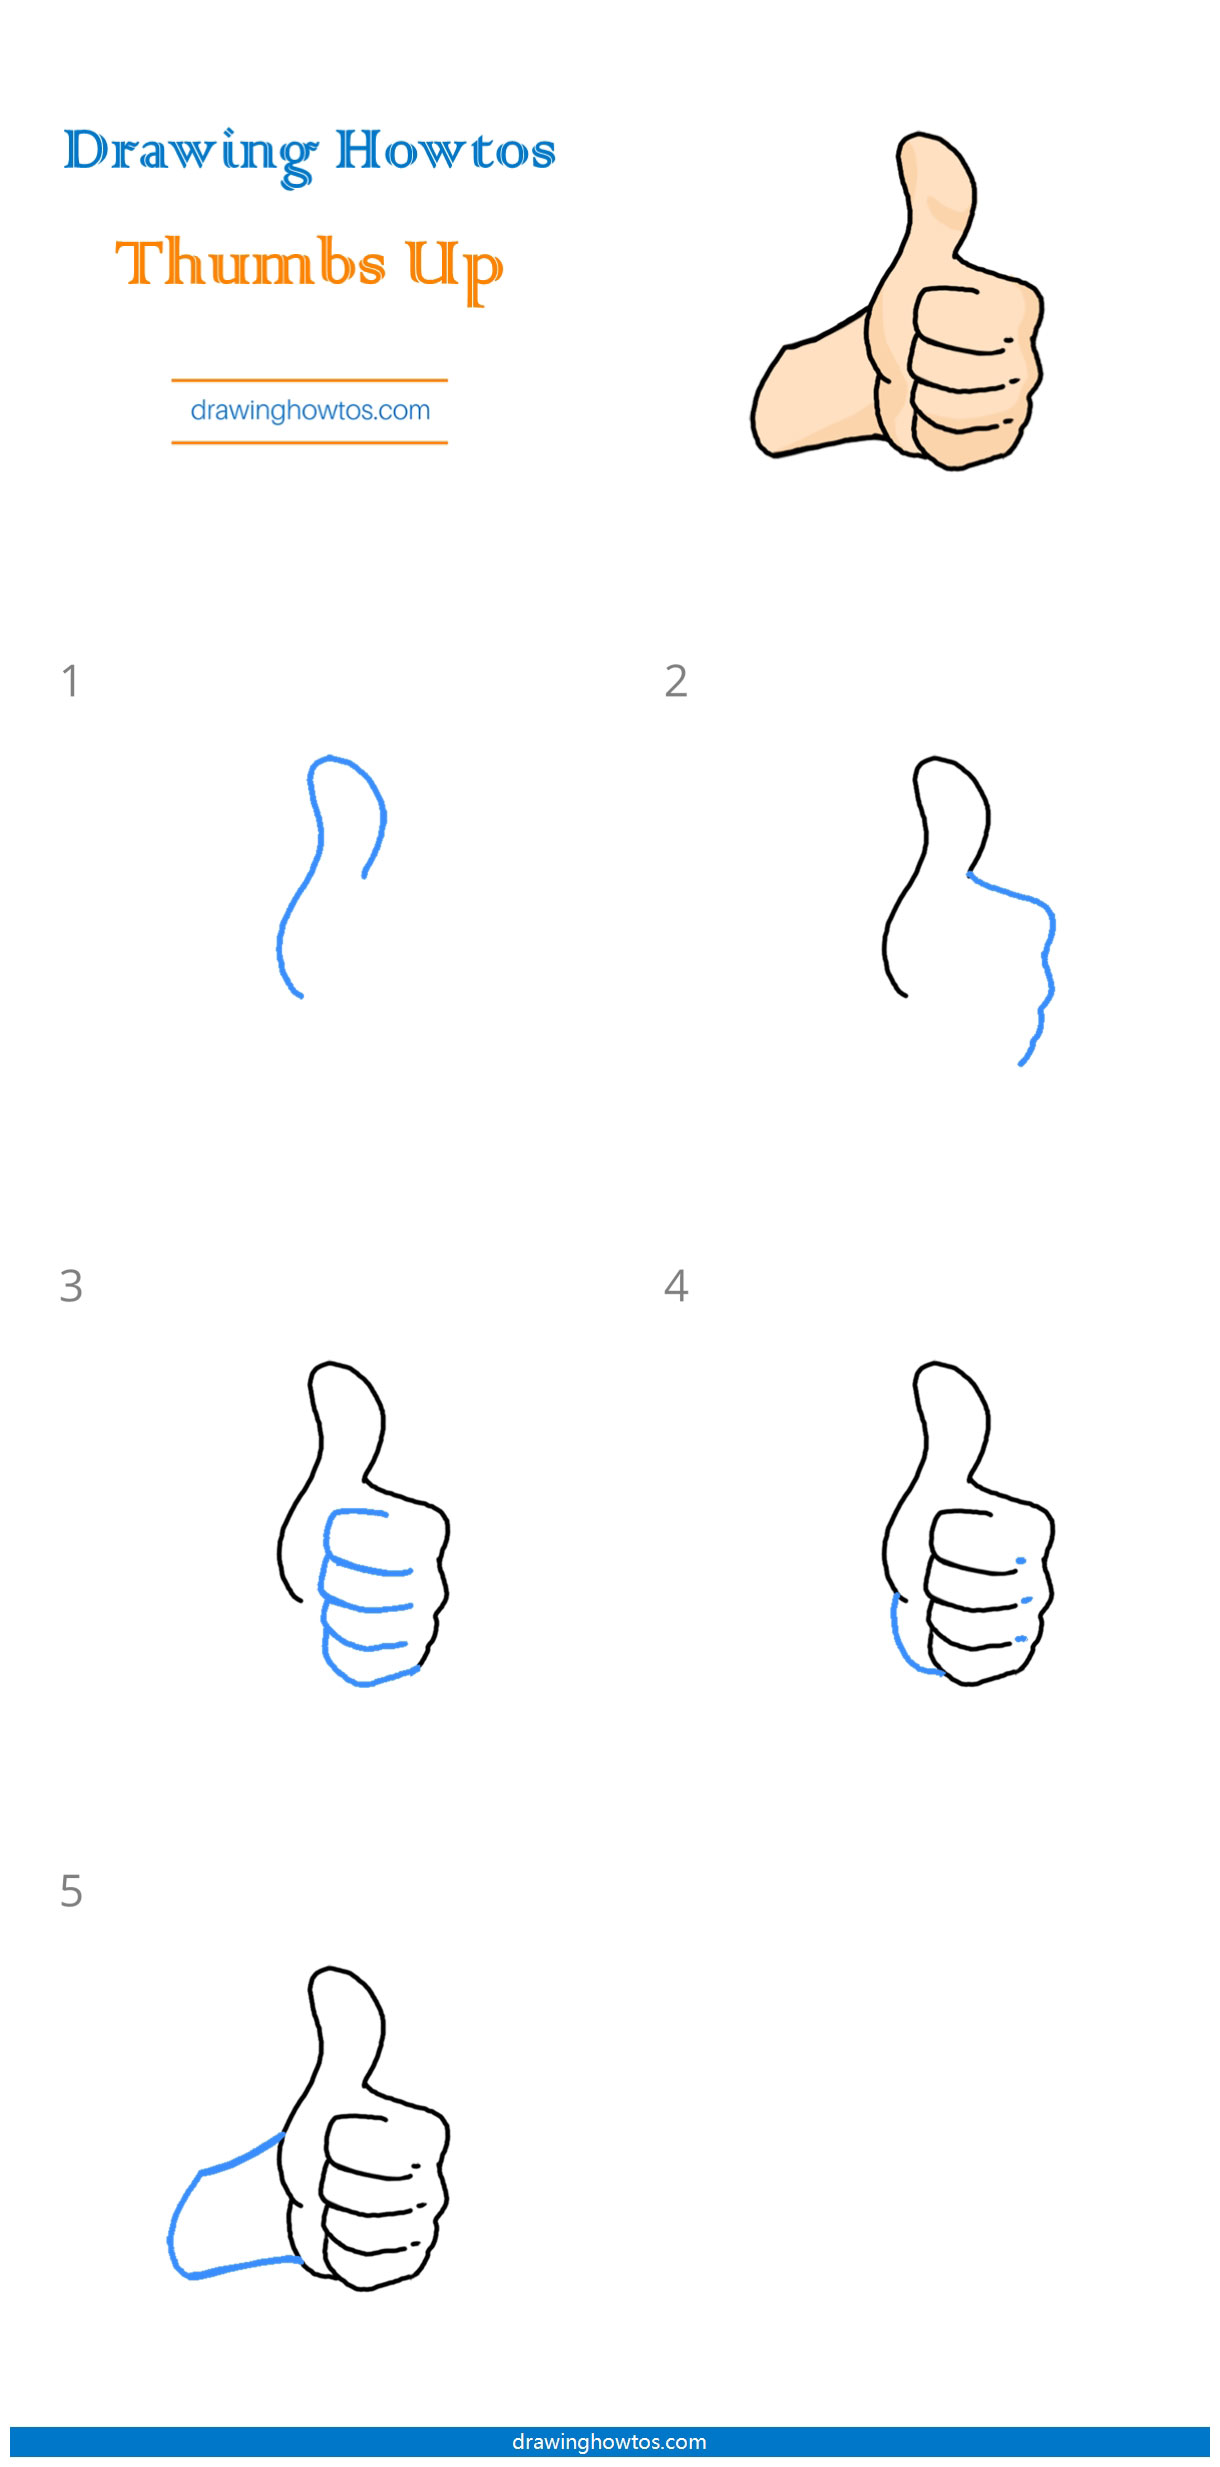 How to Draw a Thumbs Up - Step by Step Easy Drawing Guides - Drawing Howtos